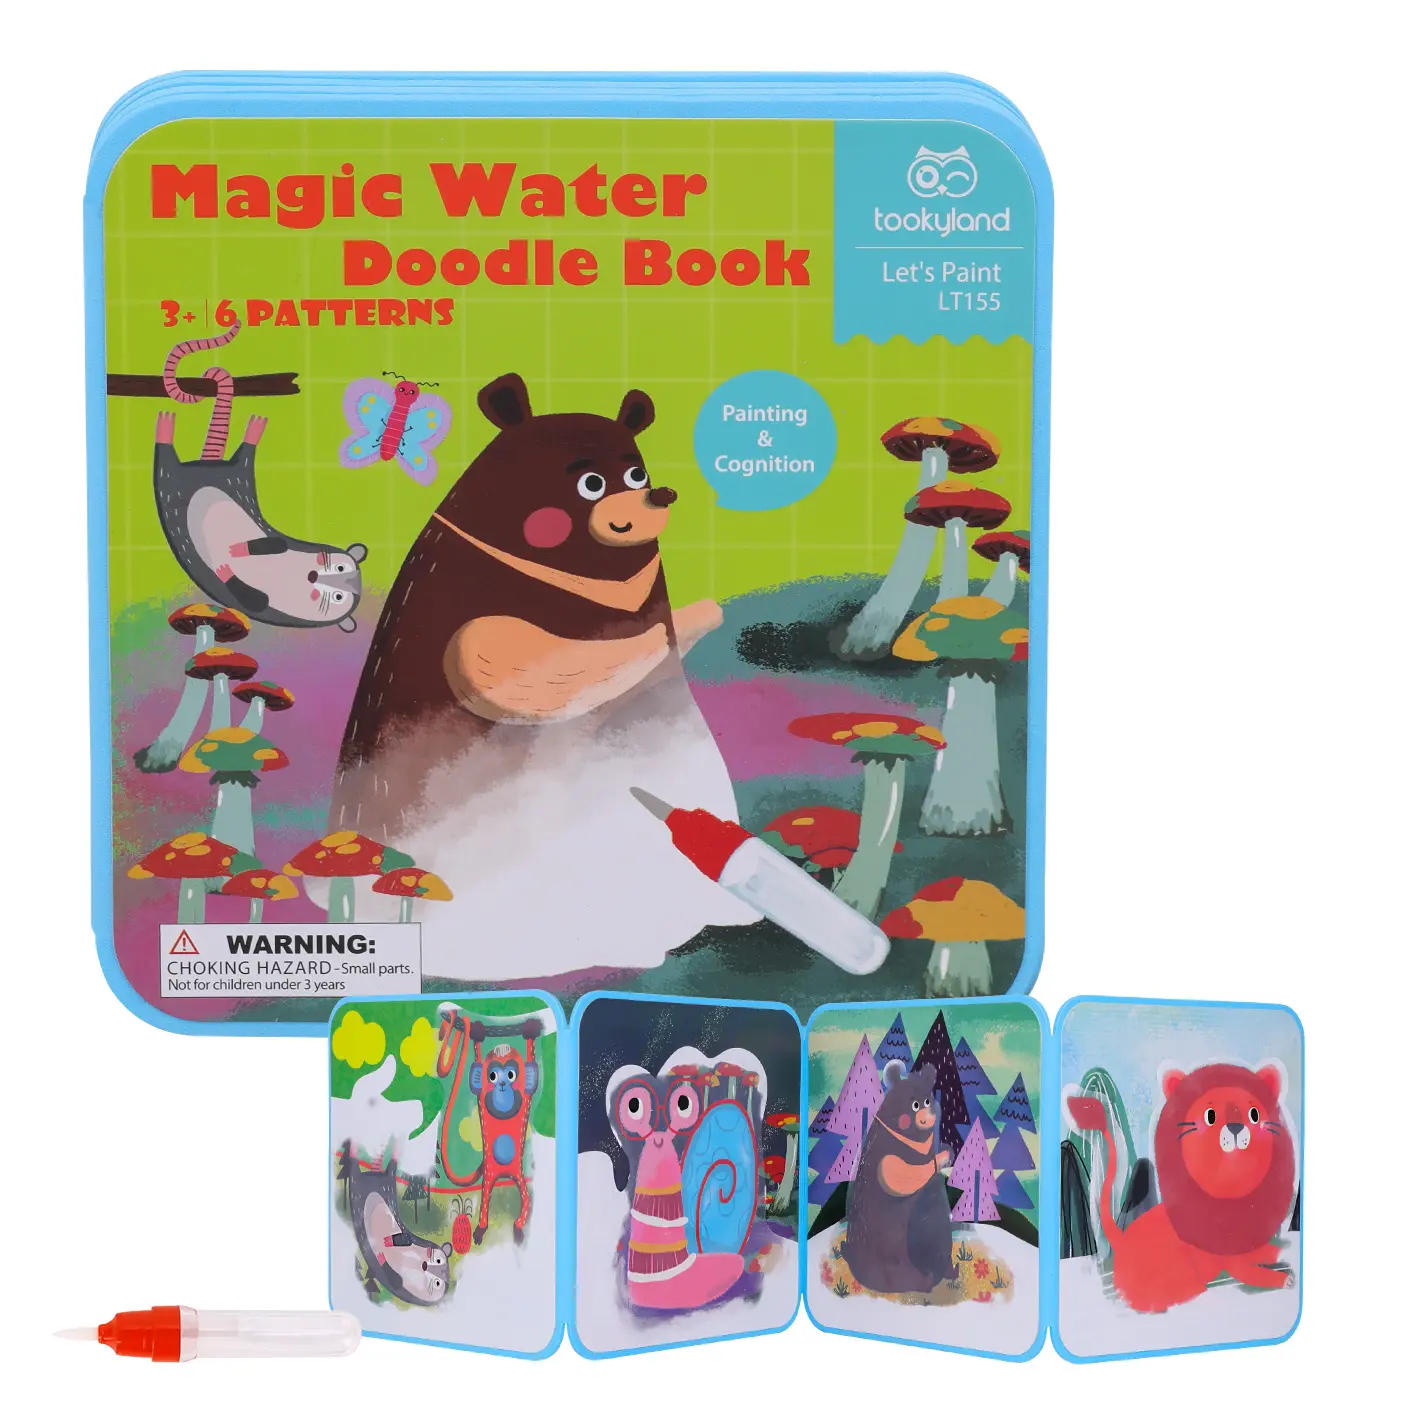 Magic Water Doodle Book Fun Cognition Book For Kids Drawing Painting Book